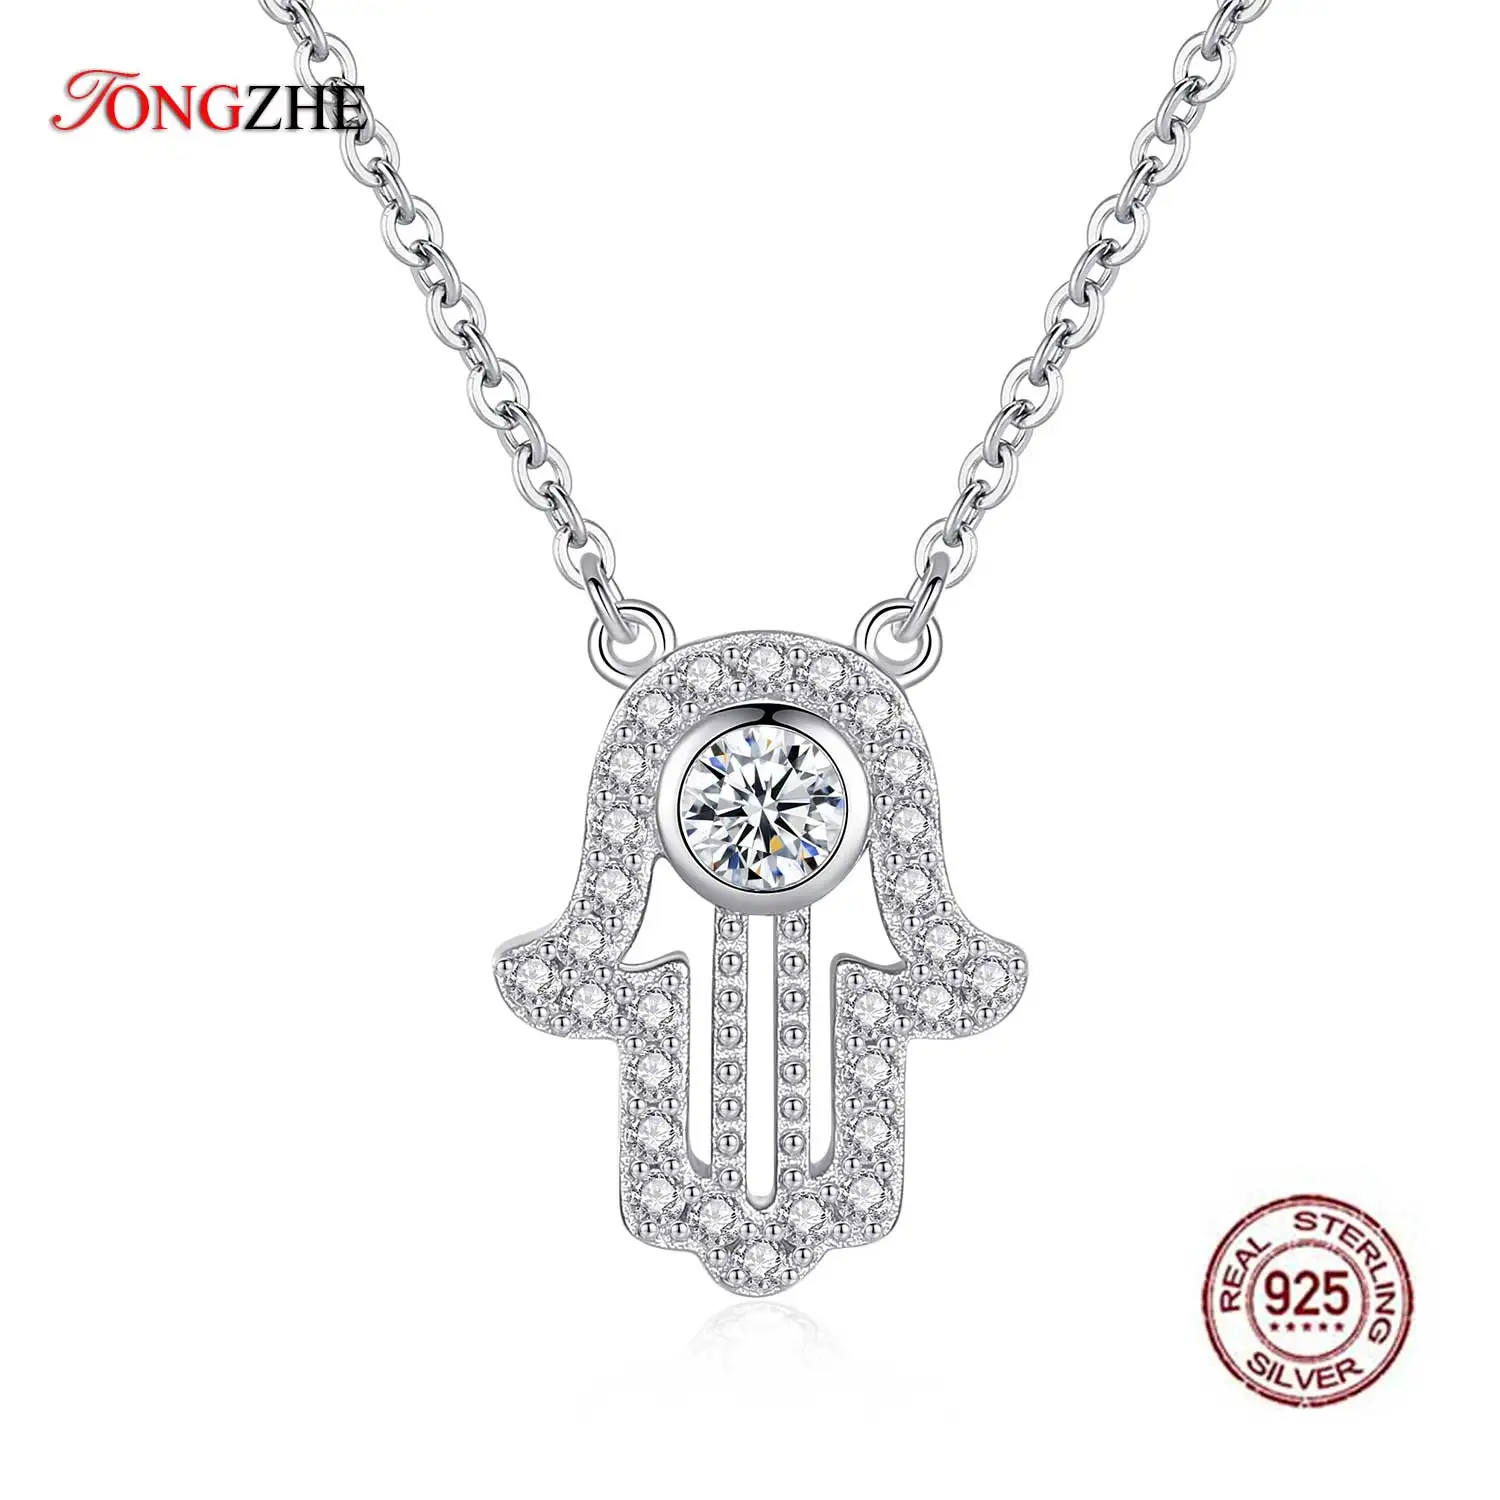 

TONGZHE Lucky Hand Hamsa 925 Sterling Silver Necklace Women Lucky Fatima Long Chain Initial Necklace Turkey Jewelry Gift